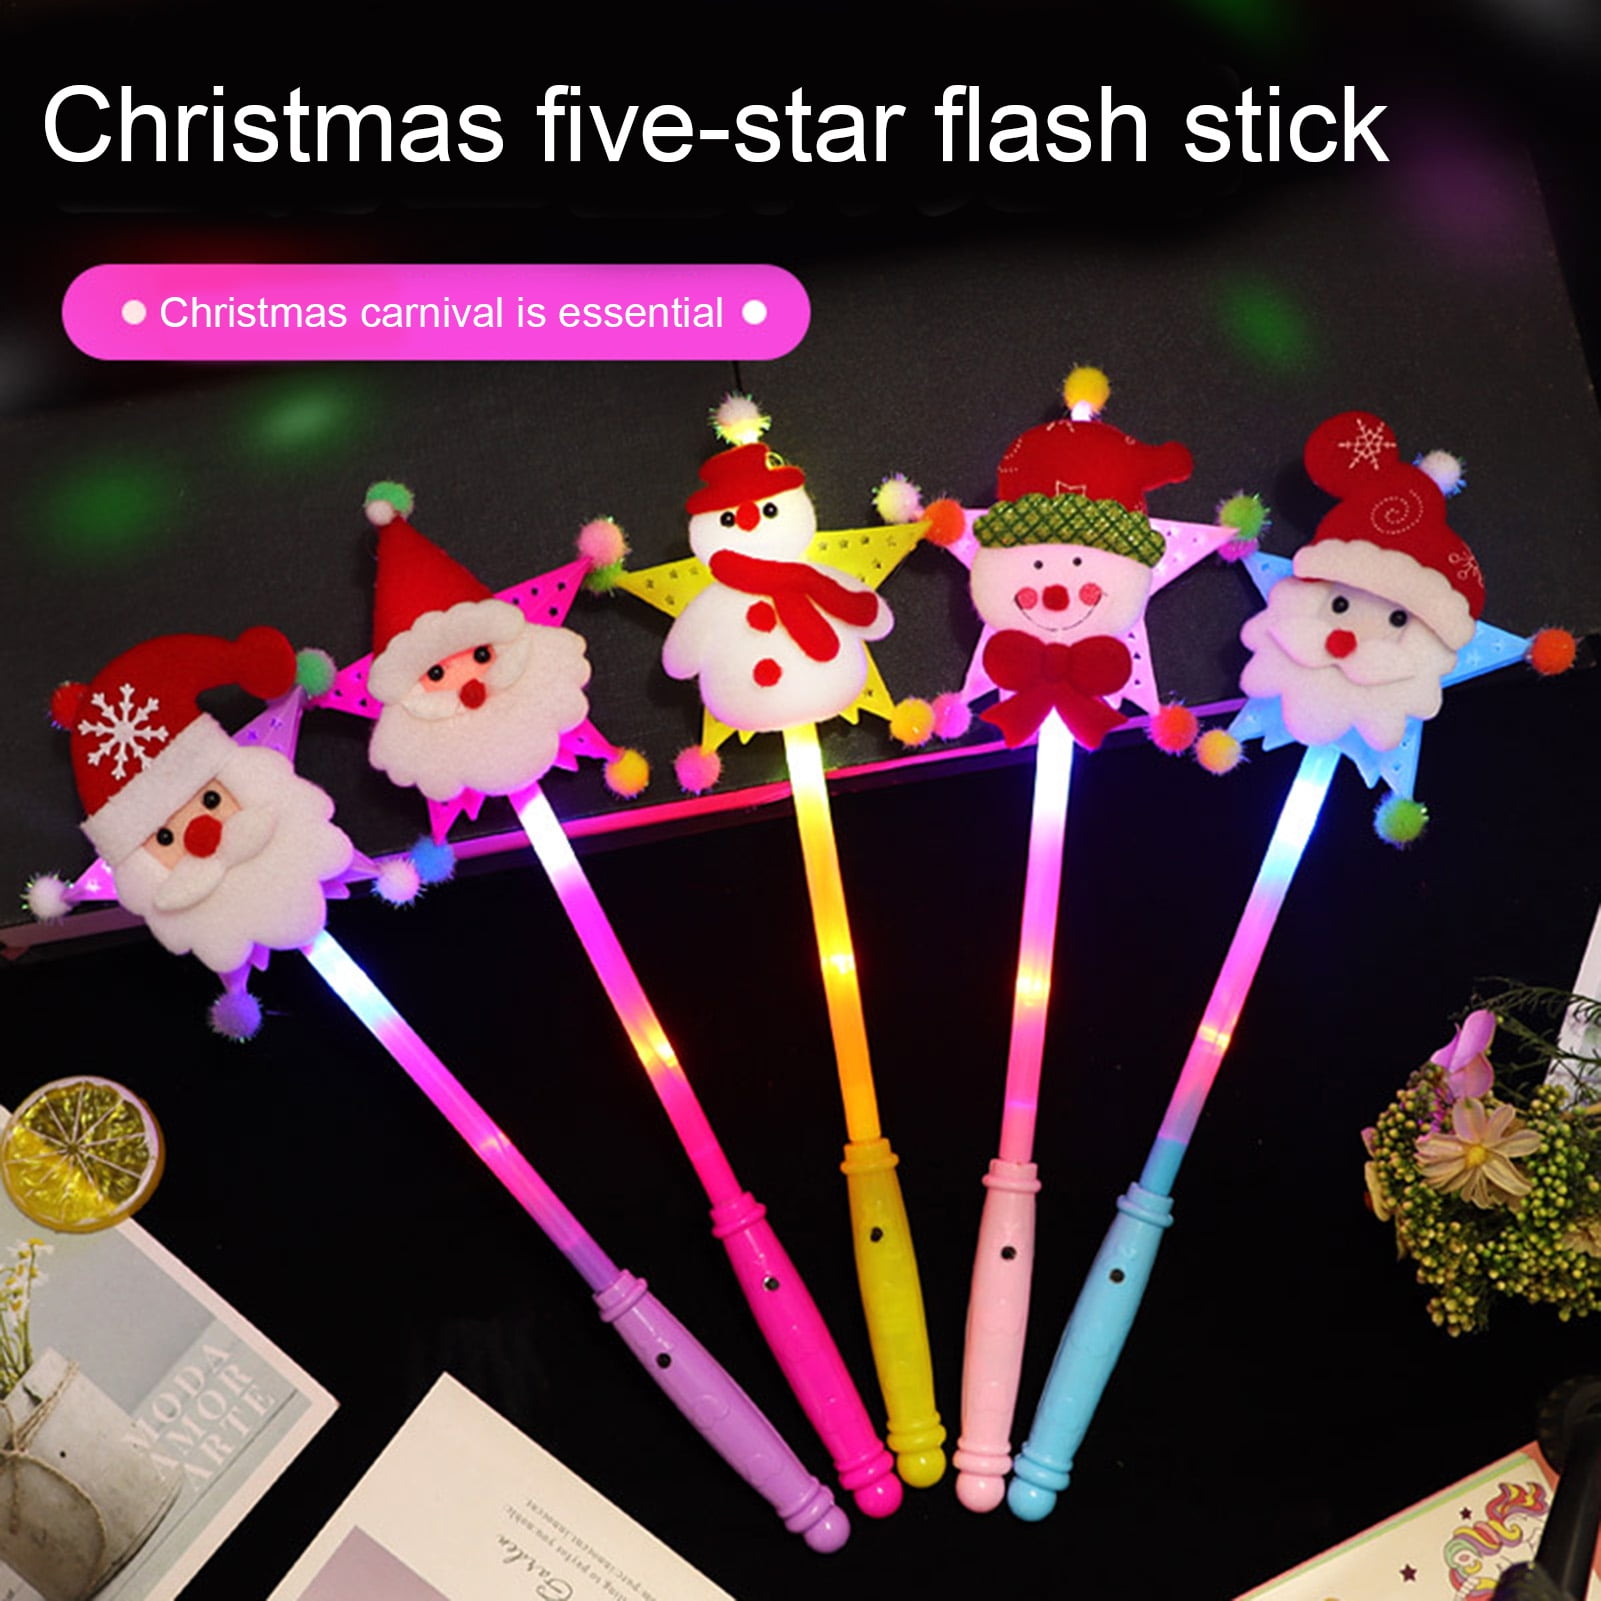 Tutuviw Party Sticks Glow Sticks Party Supplies 100pk - 8 Inch Glow in the  Dark Light Up Sticks Party Favors Christmas lights Christmas decorations  Christmas gifts 